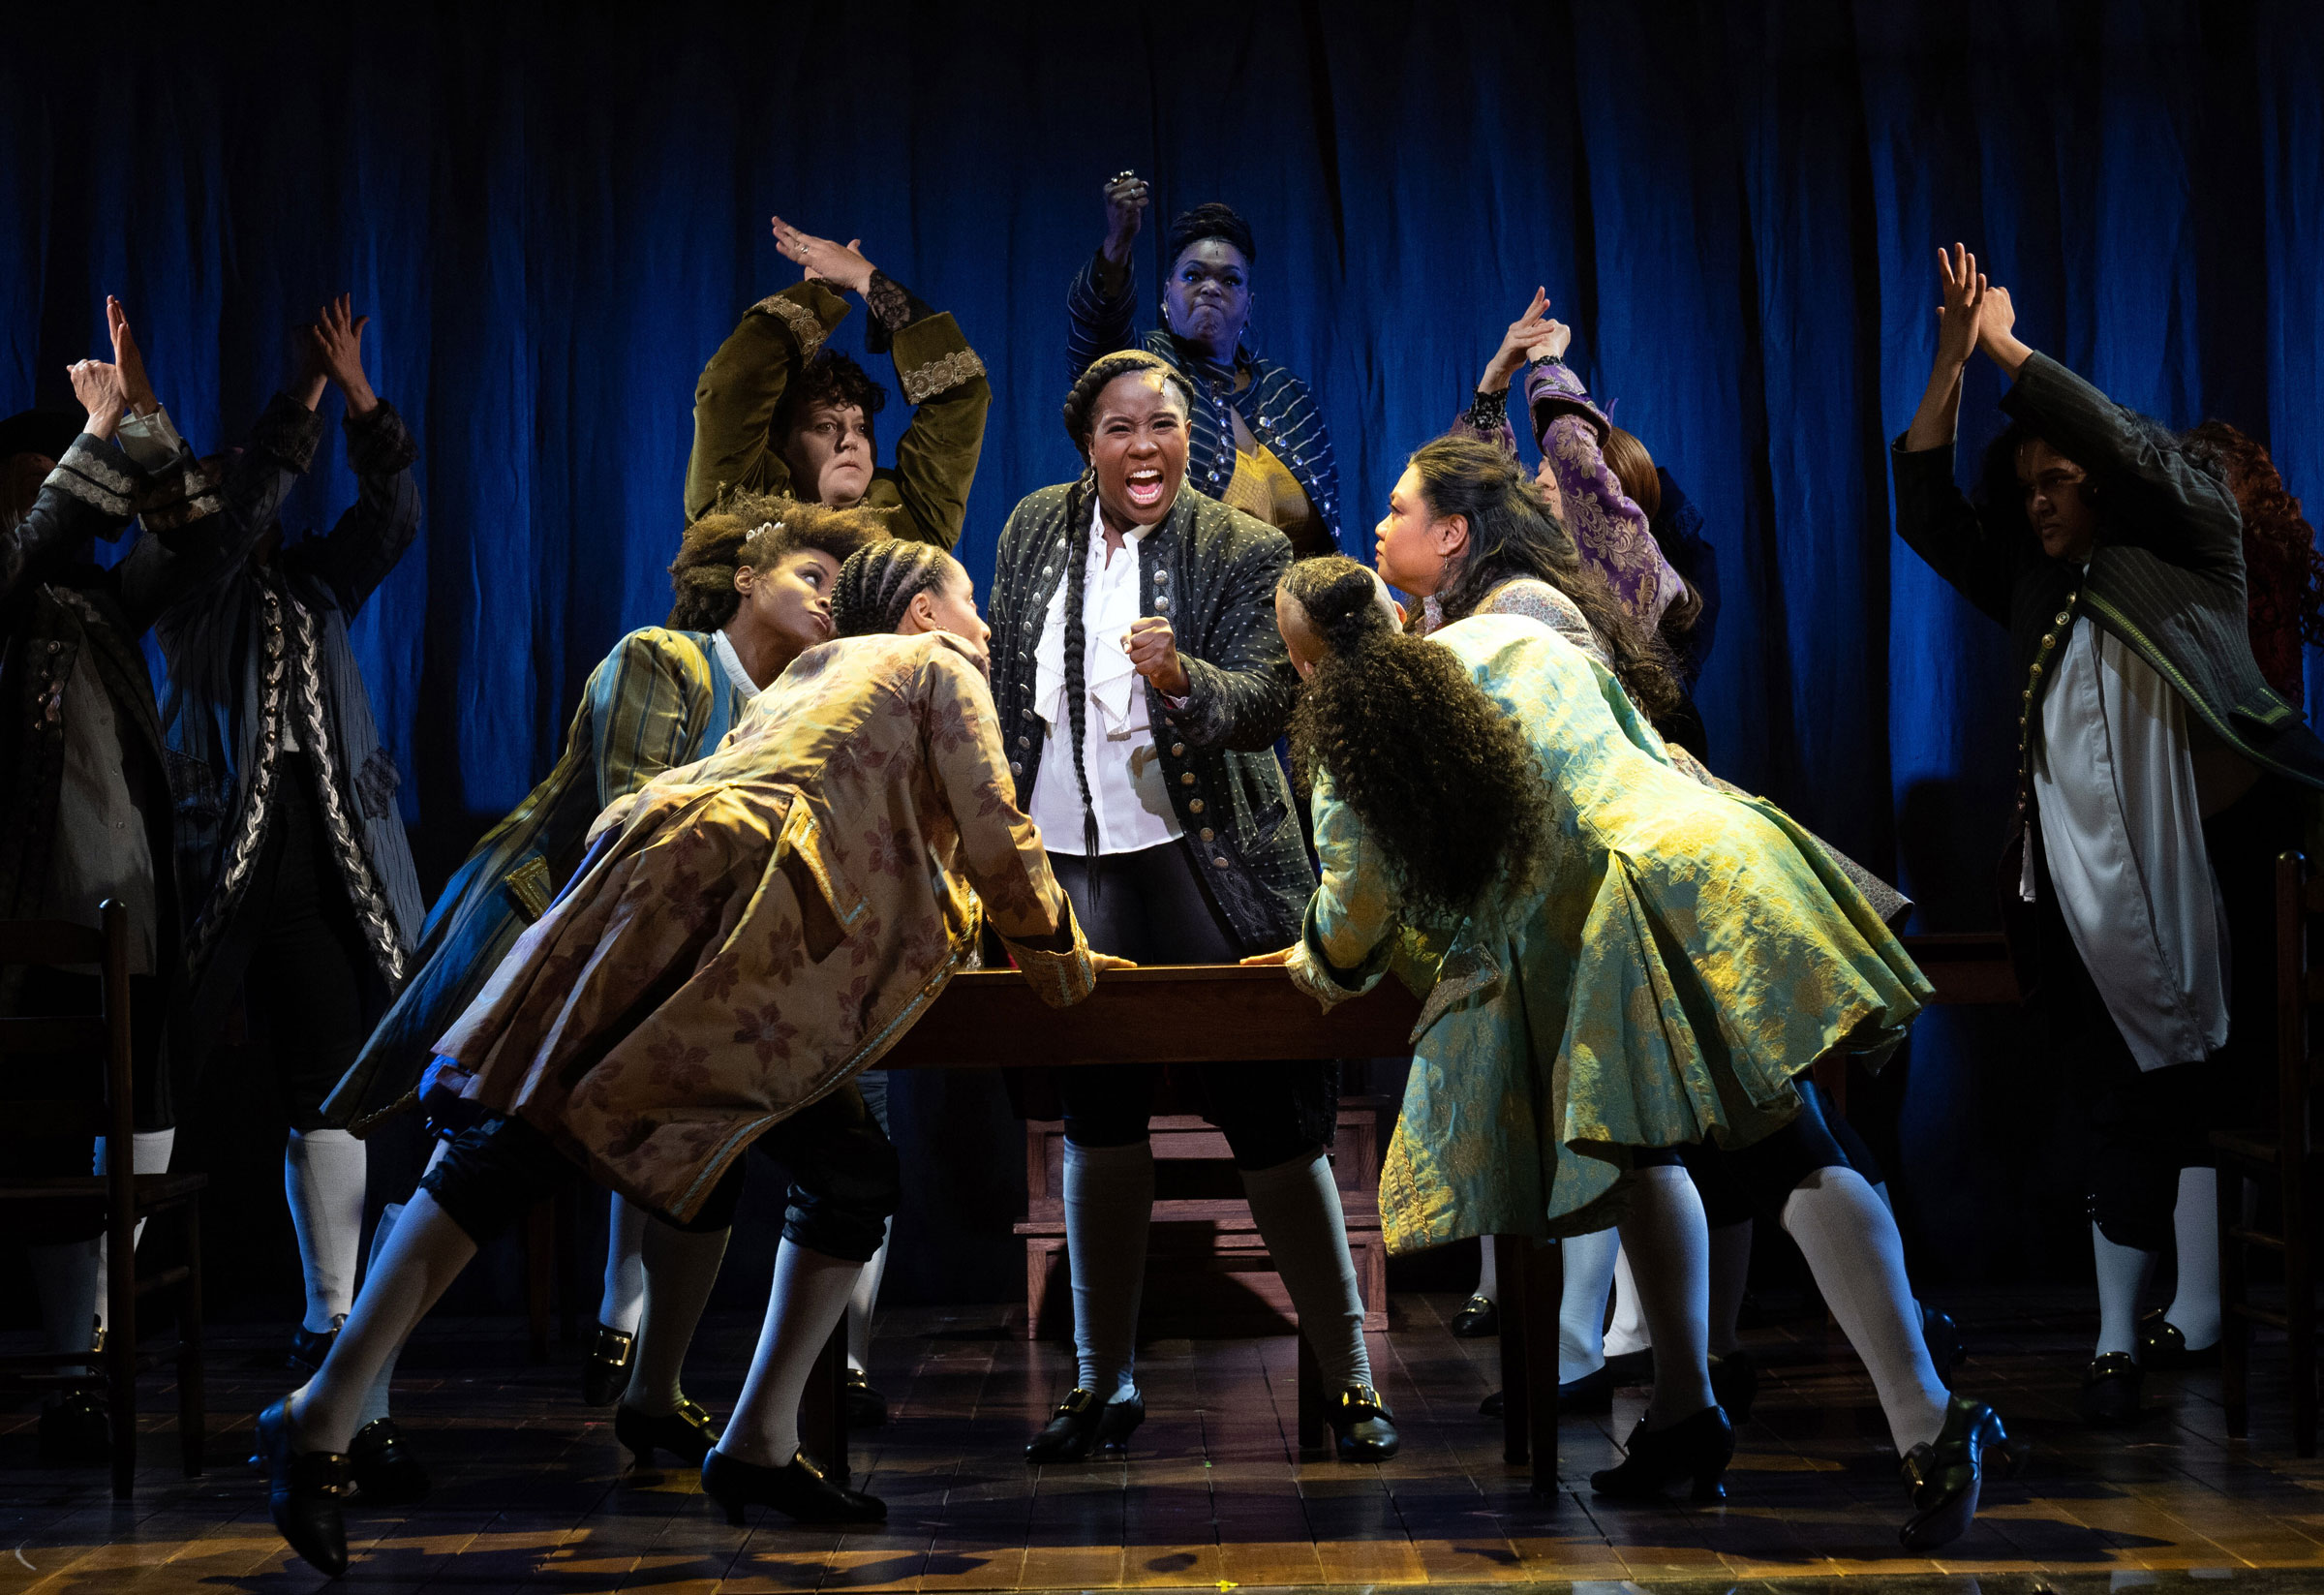 Crystal Lucas-Perry, center, as John Adams in "1776," in which the performers identify as female, transgender and nonbinary, at the American Airlines Theater in New York, Sept. 15, 2022. (Sara Krulwich—The New York Times/Redux)